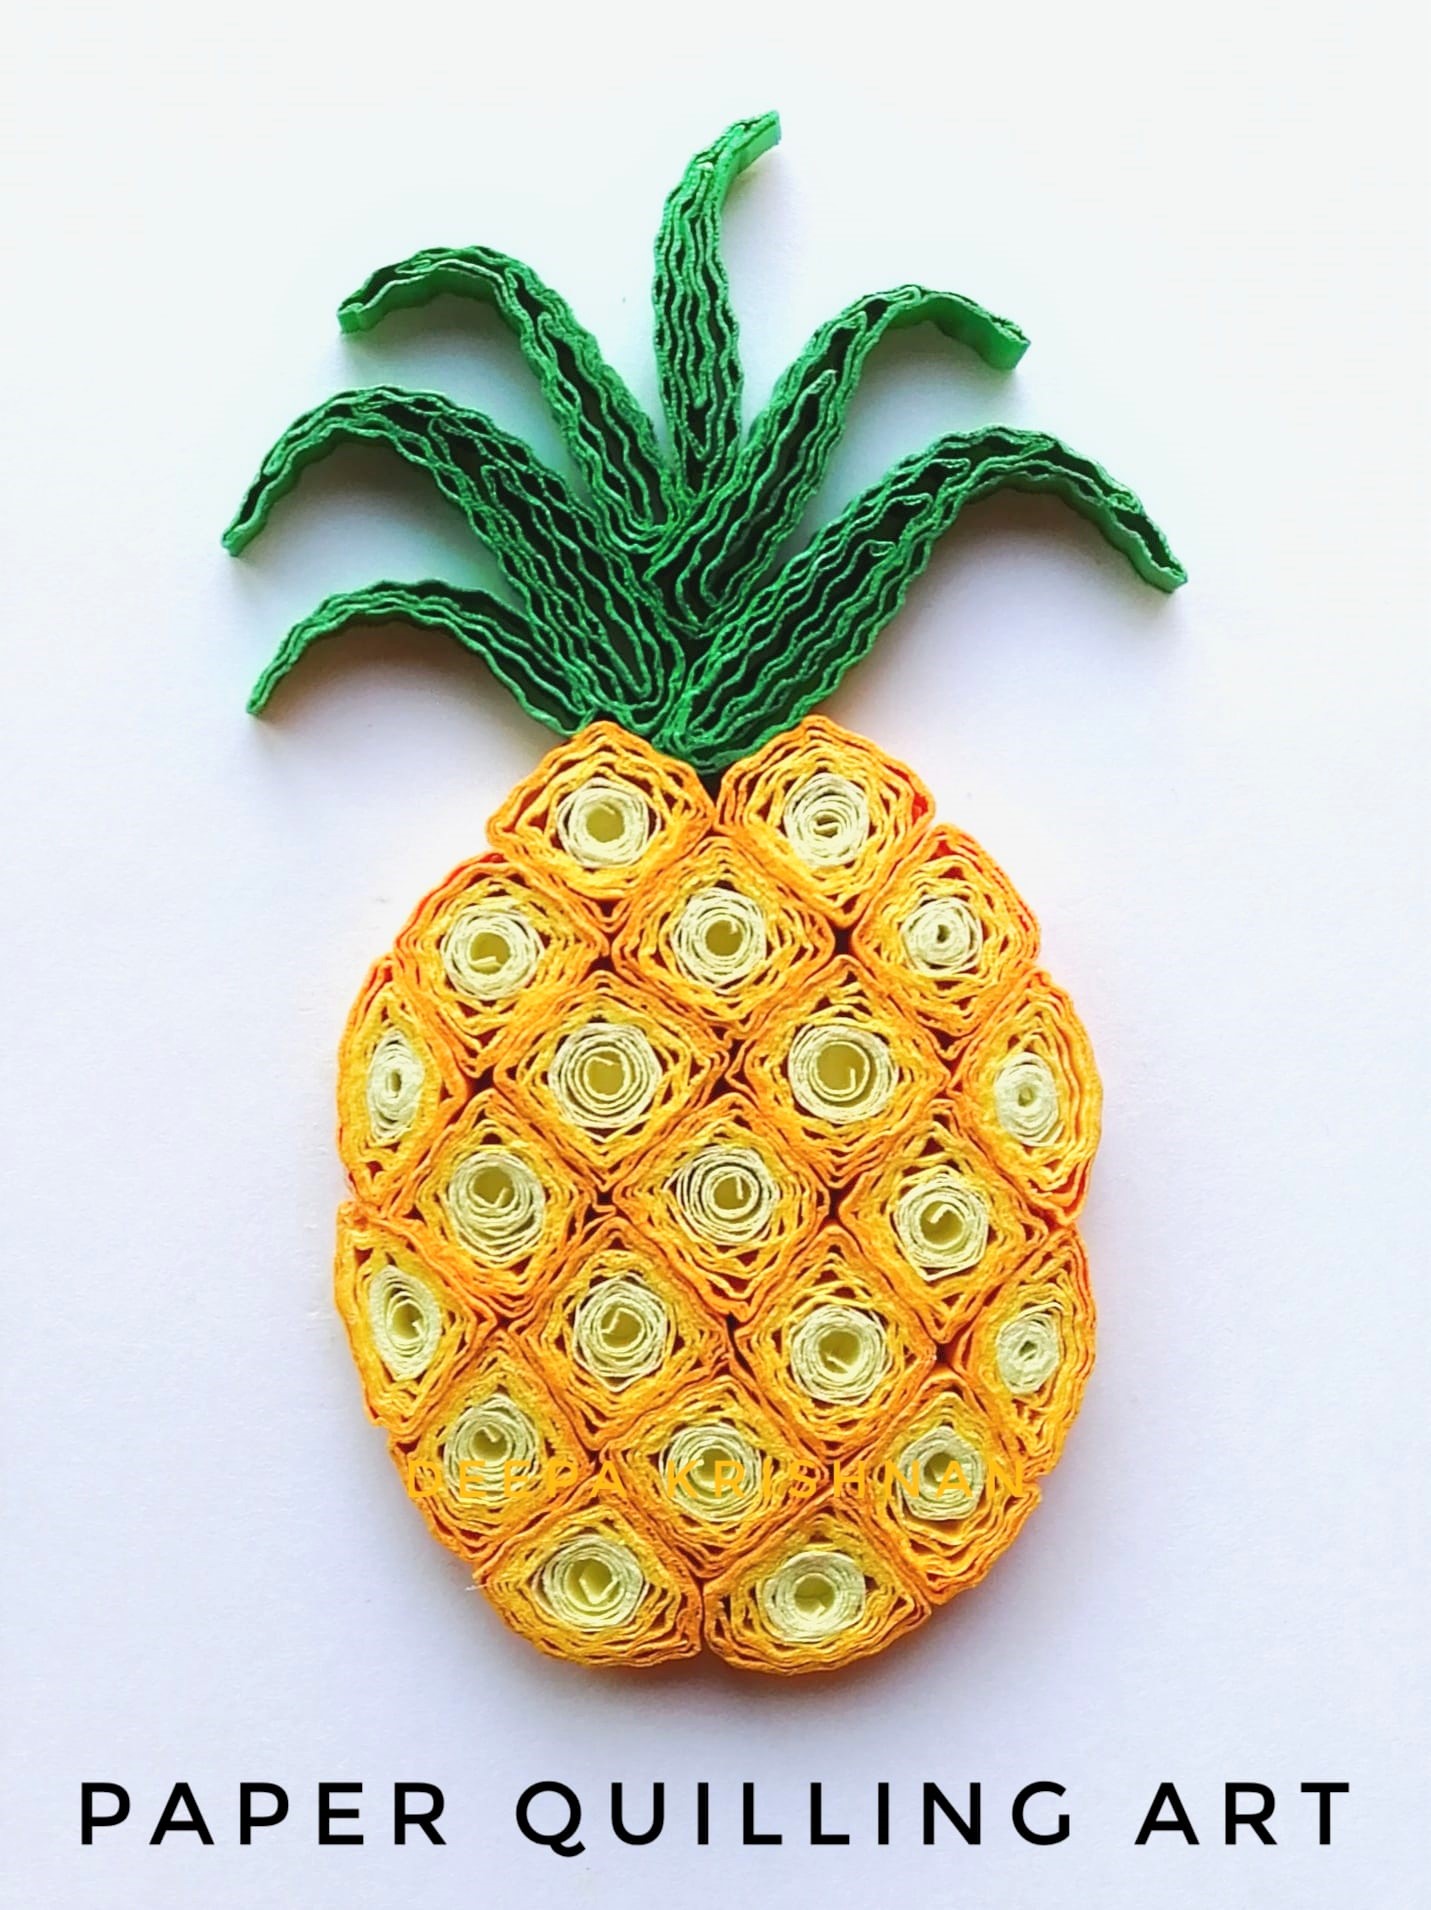 A Paper Quilling  Pineapple experience project by Yaymaker